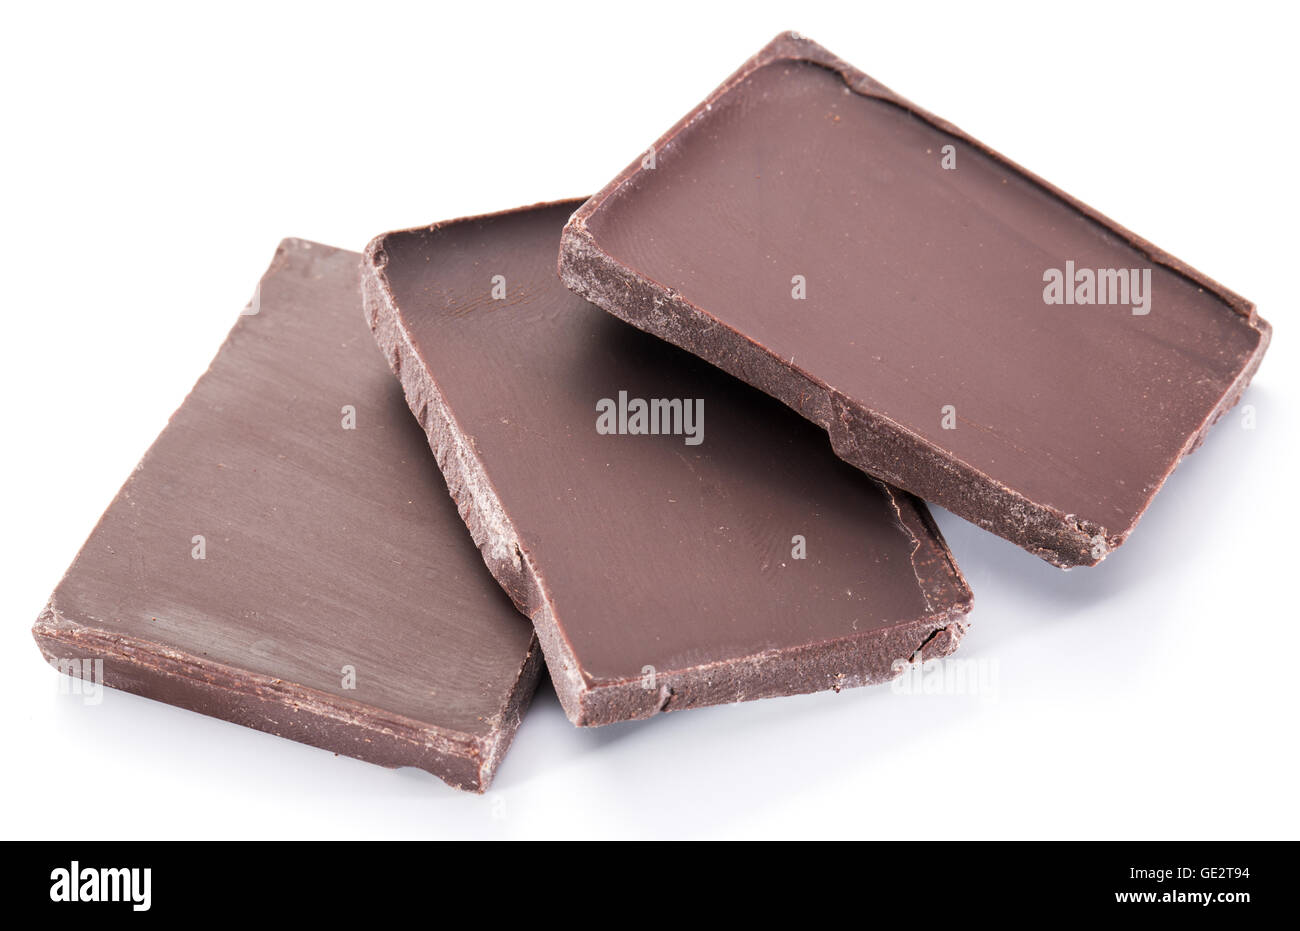 Pieces of chocolate bar isolated on a white background. Stock Photo